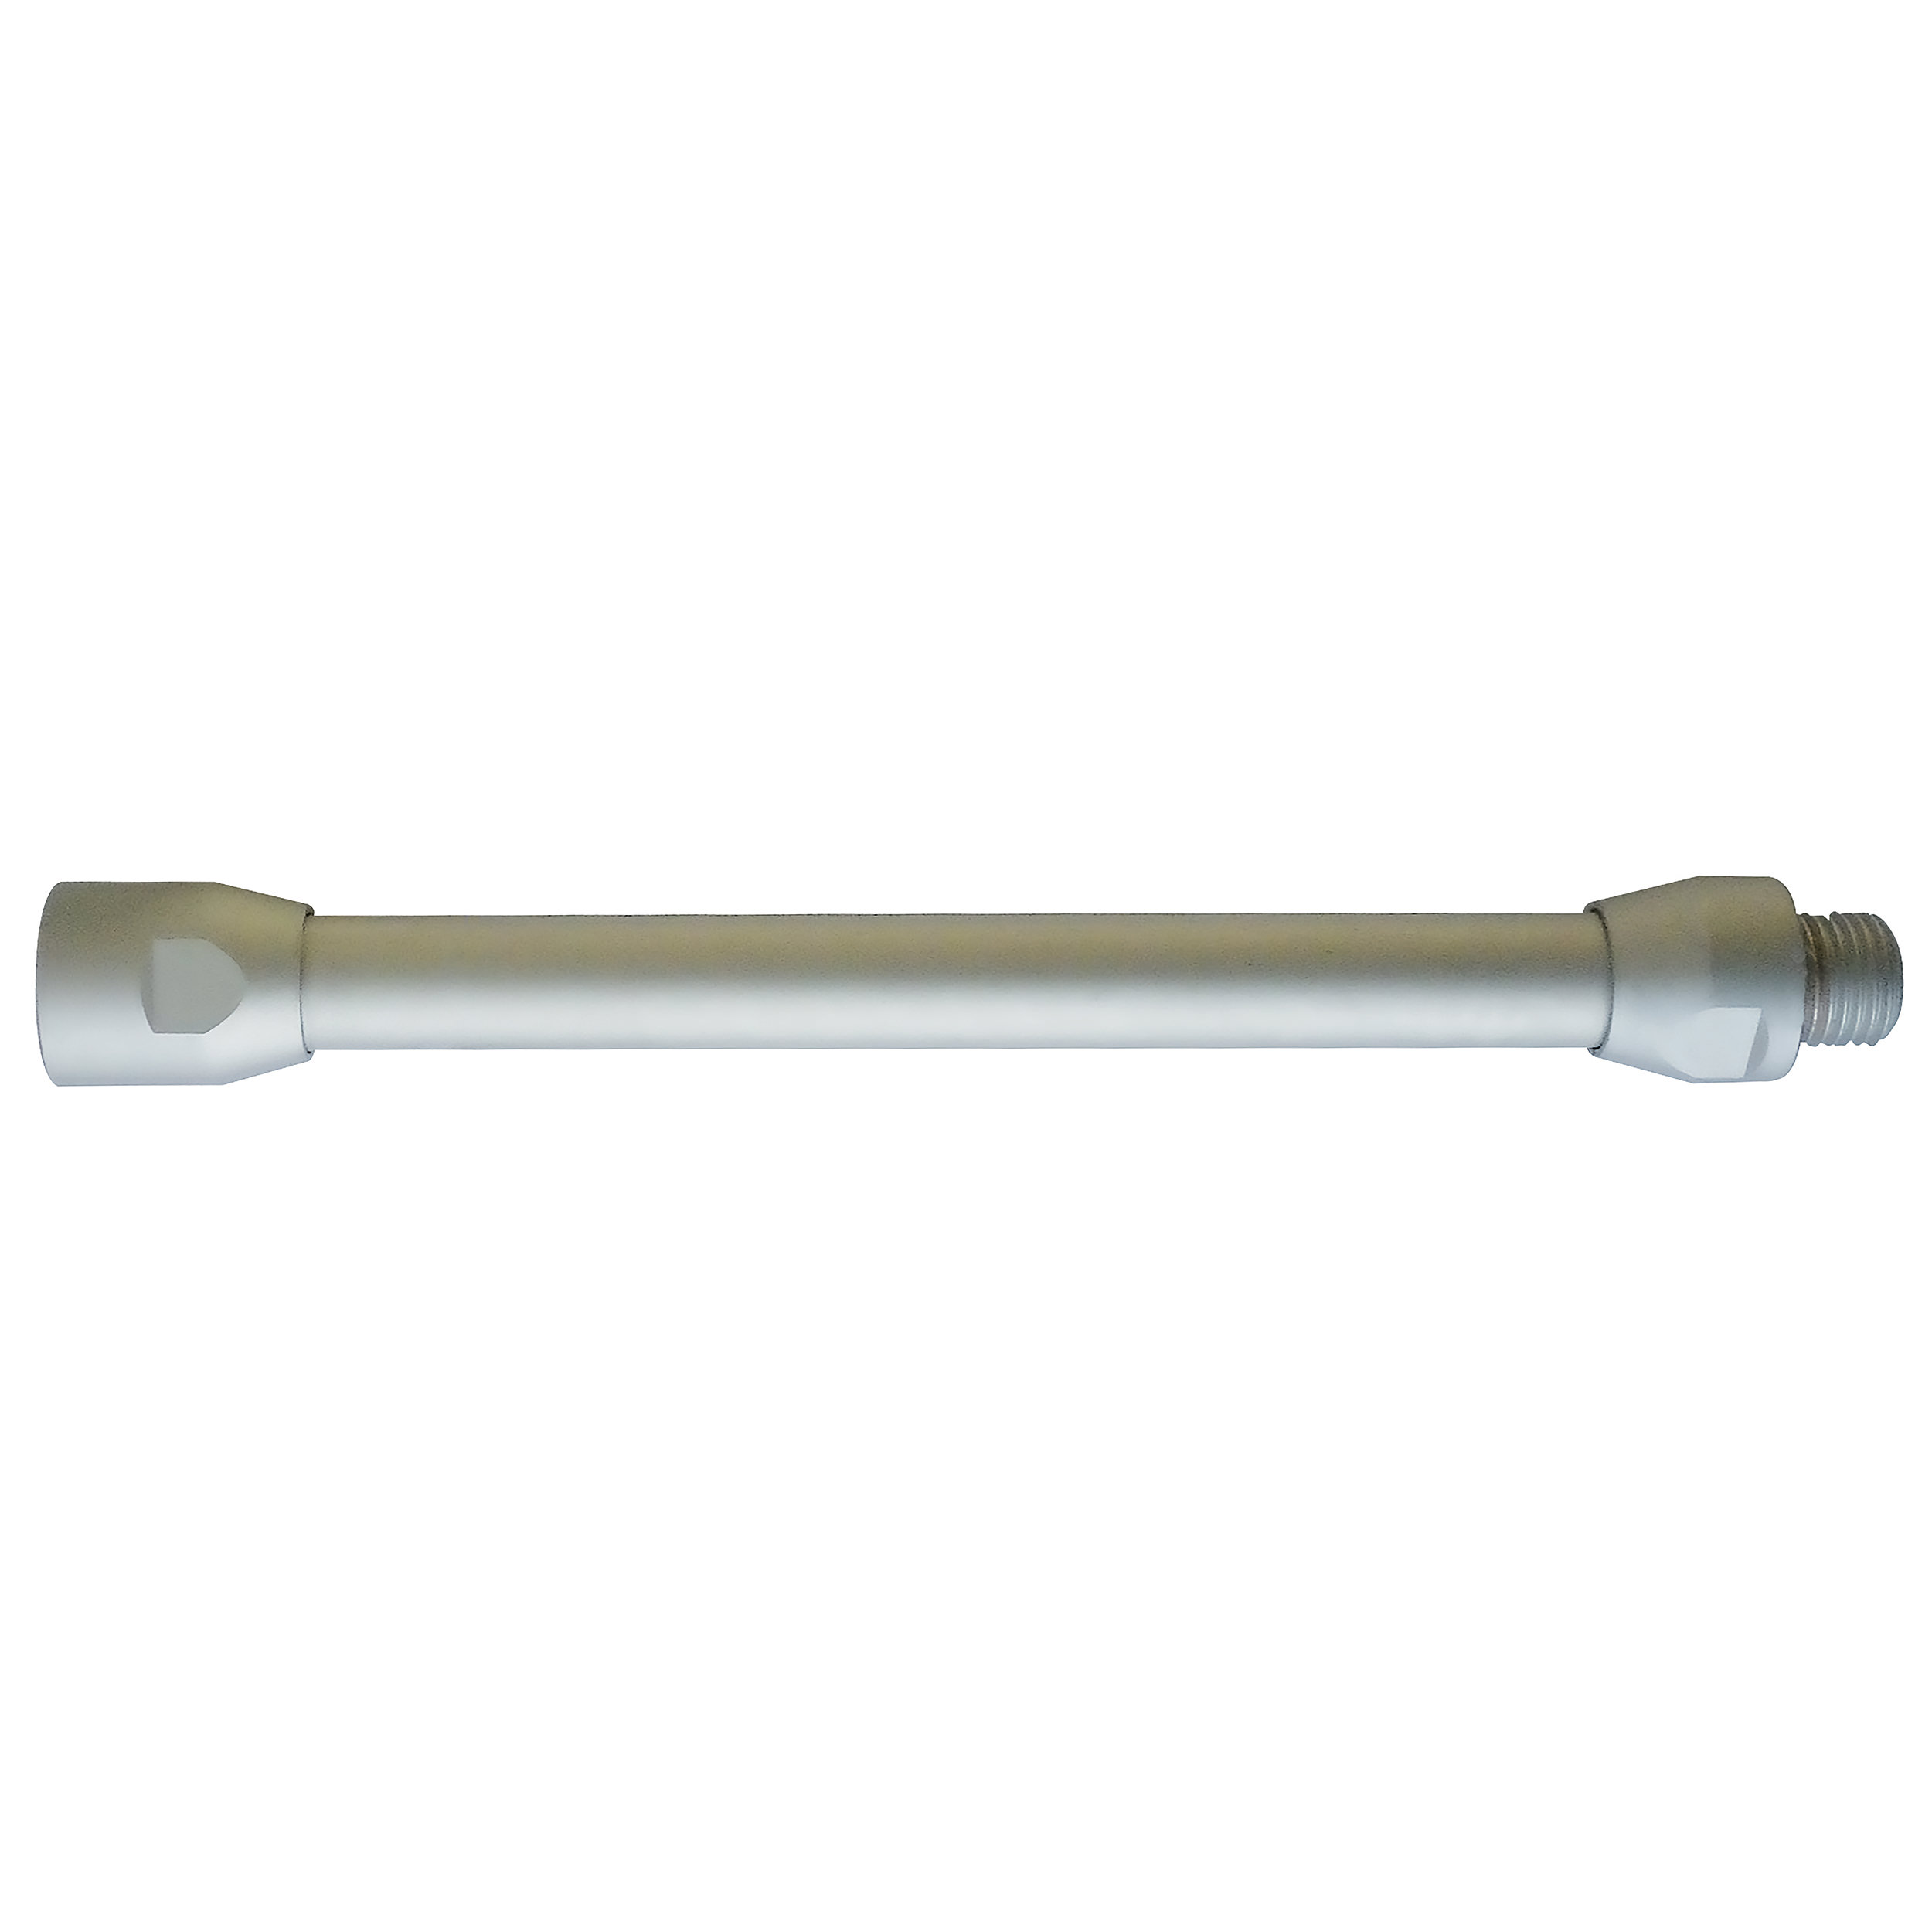 Extension for blow guns, straight, L: 150 mm, hole-Ø8mm, inlet: M12 × 1.25 male, rotatable; outlet: M12 × 1.25 female, rigid; alu